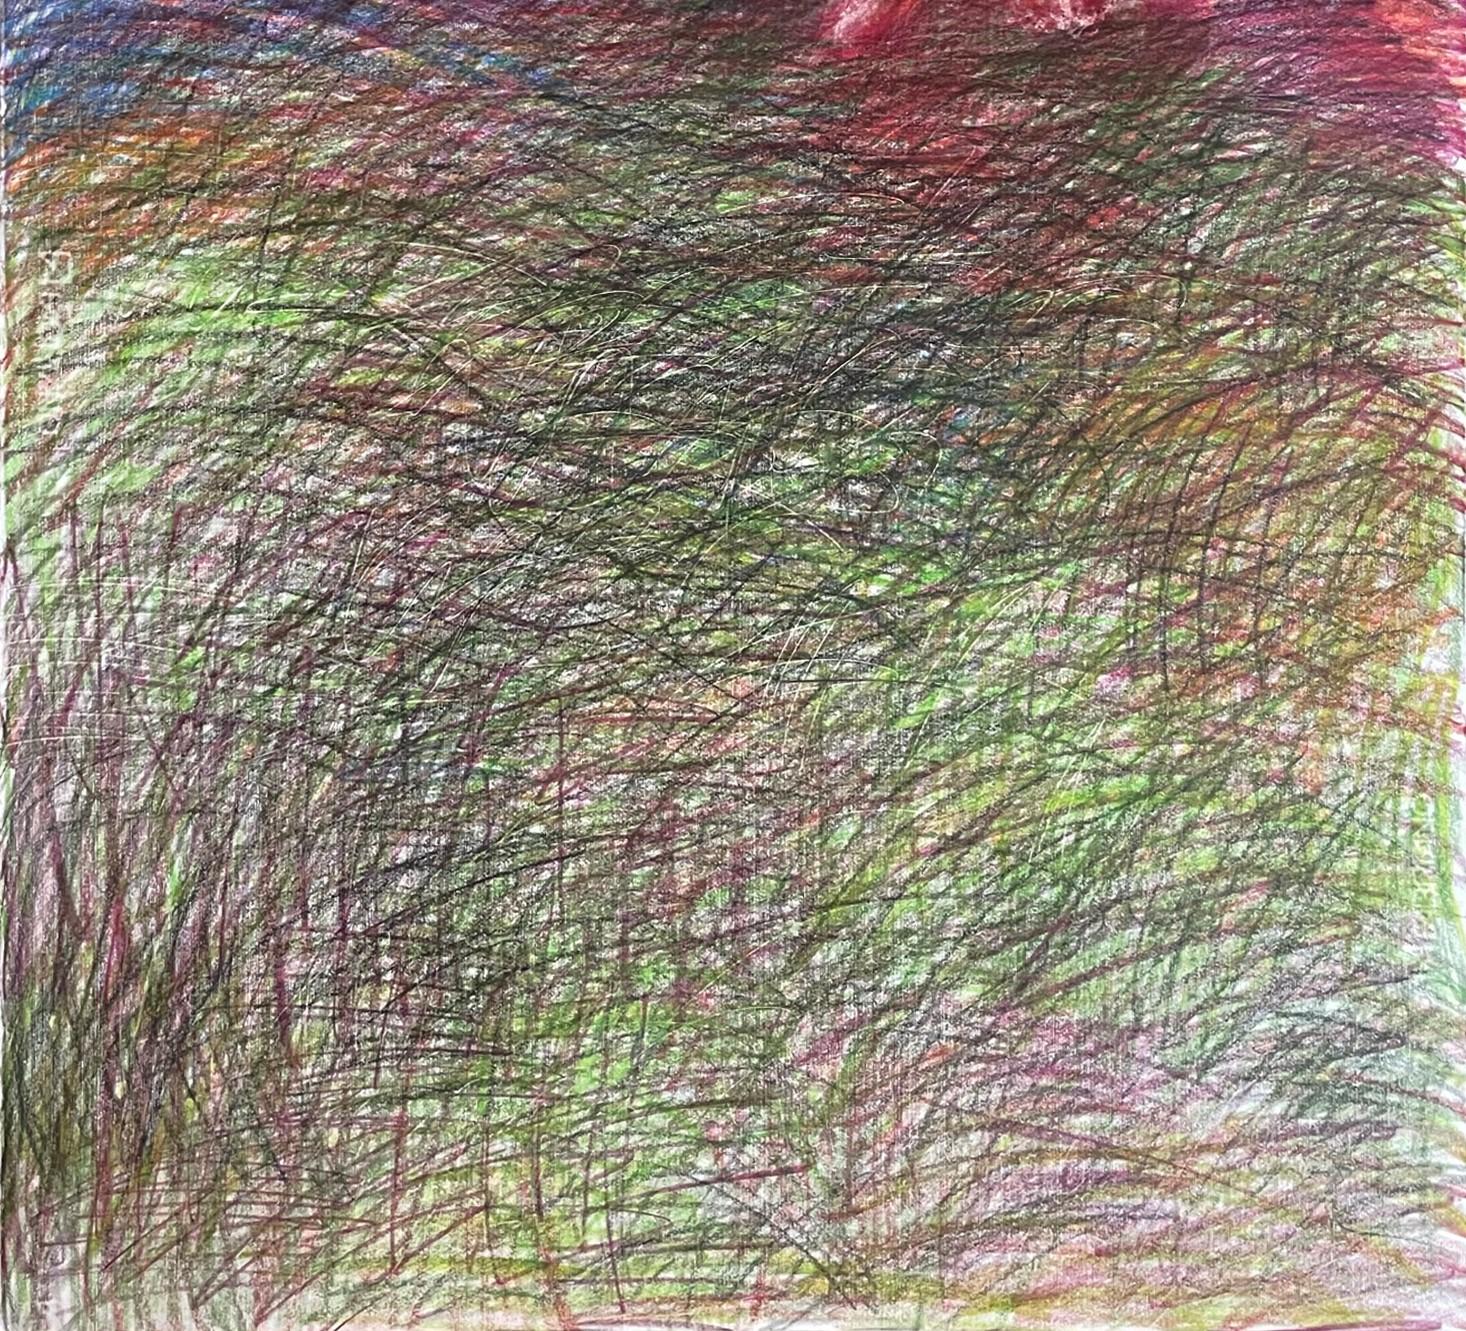 Untitled_Body on the Field #6, 2022
coloured pencils on paper
39 3/8 H x 27 9/16 W inches
100 H x 70 W cm

Signed on reverse

Zsolt Berszán embodies in his works the dissolution of the human body through the prism of the fragment, the body in